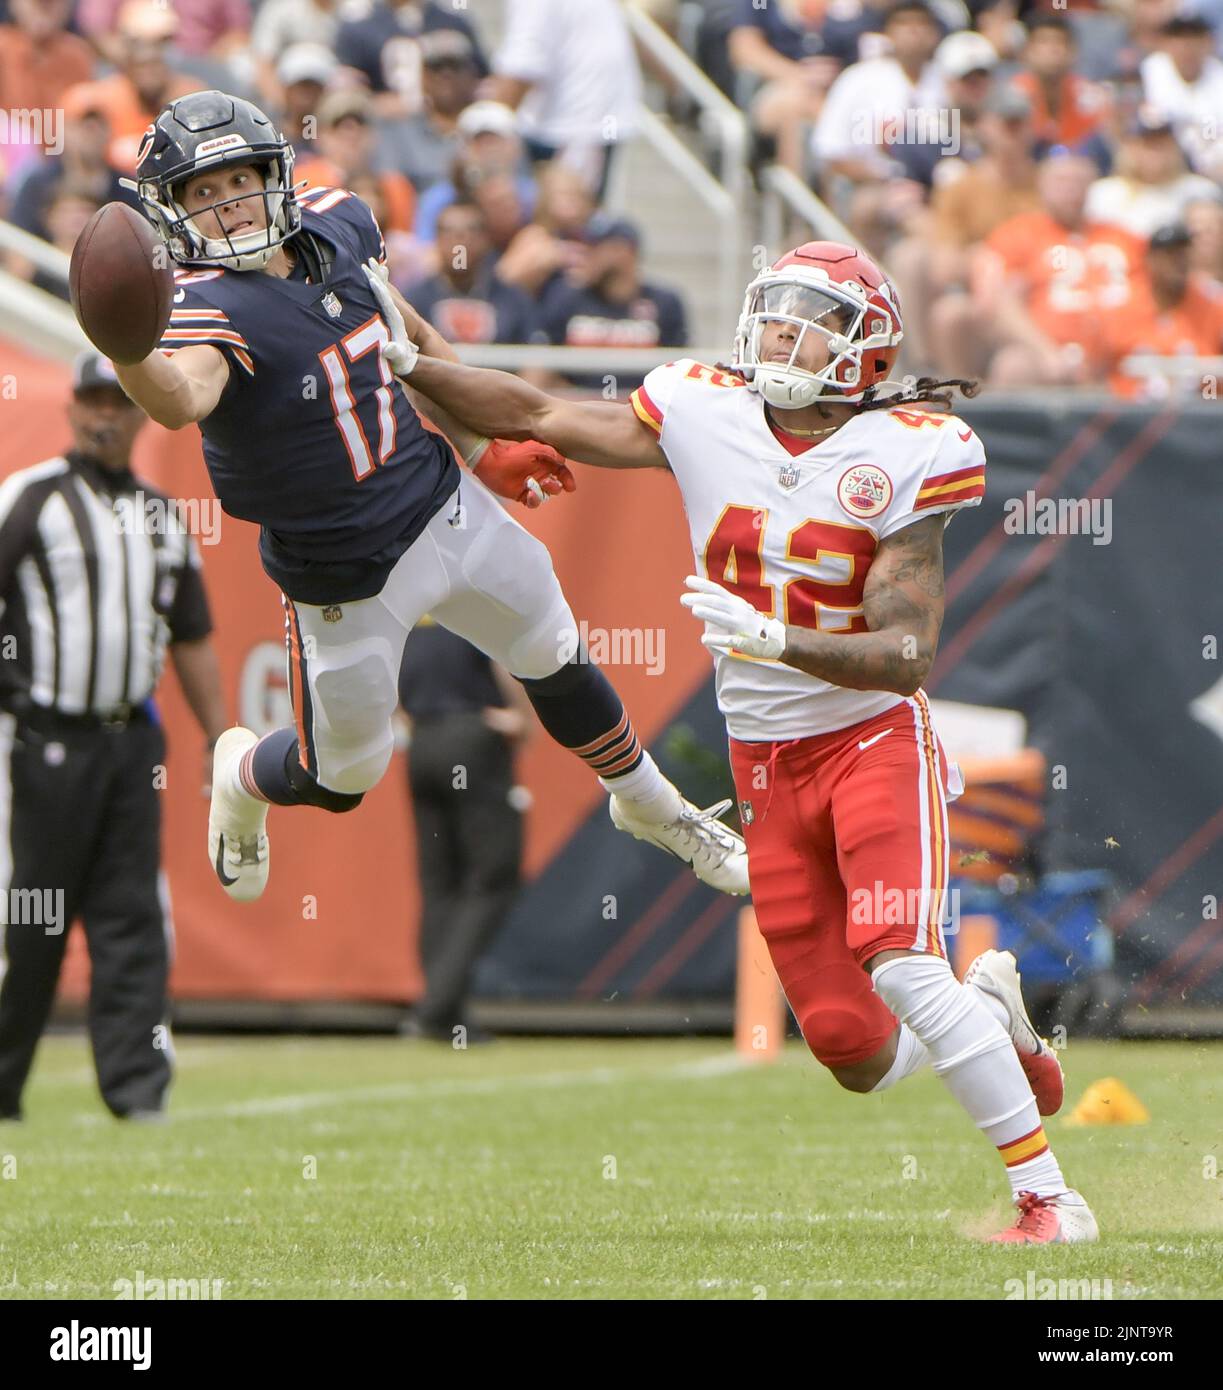 Chicago, United States. 13th Aug, 2022. Chicago Bears wide receiver Chris Finke (17) attempts to catch a pass from quarterback Nathan Peterman as Kansas City Chiefs safety Devon Key (42) looks on during the fourth quarter of a preseason game at Soldier Field in Chicago on Saturday, August 13, 2022. The Bears won 19-14. Photo by Mark Black/UPI Credit: UPI/Alamy Live News Stock Photo